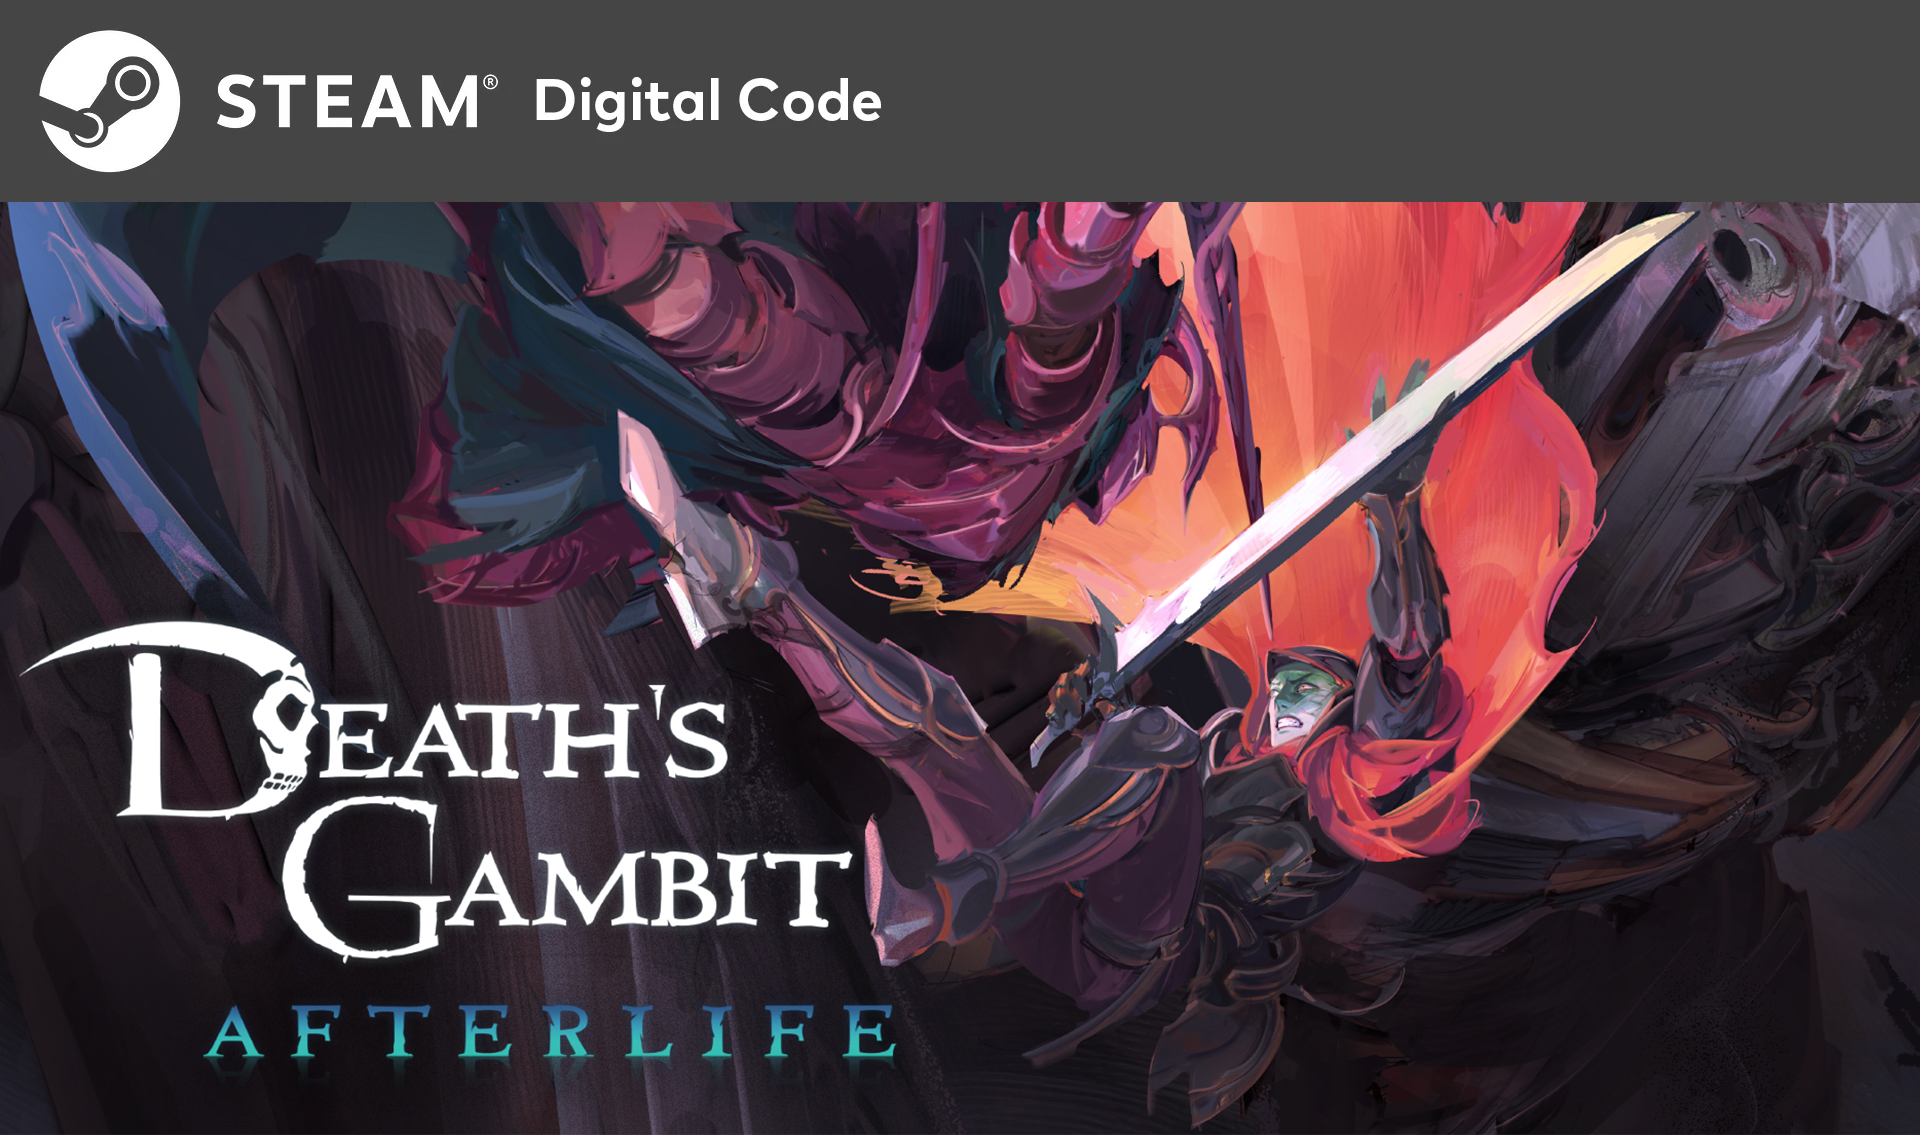 Death's Gambit: Afterlife Cheats & Trainers for PC